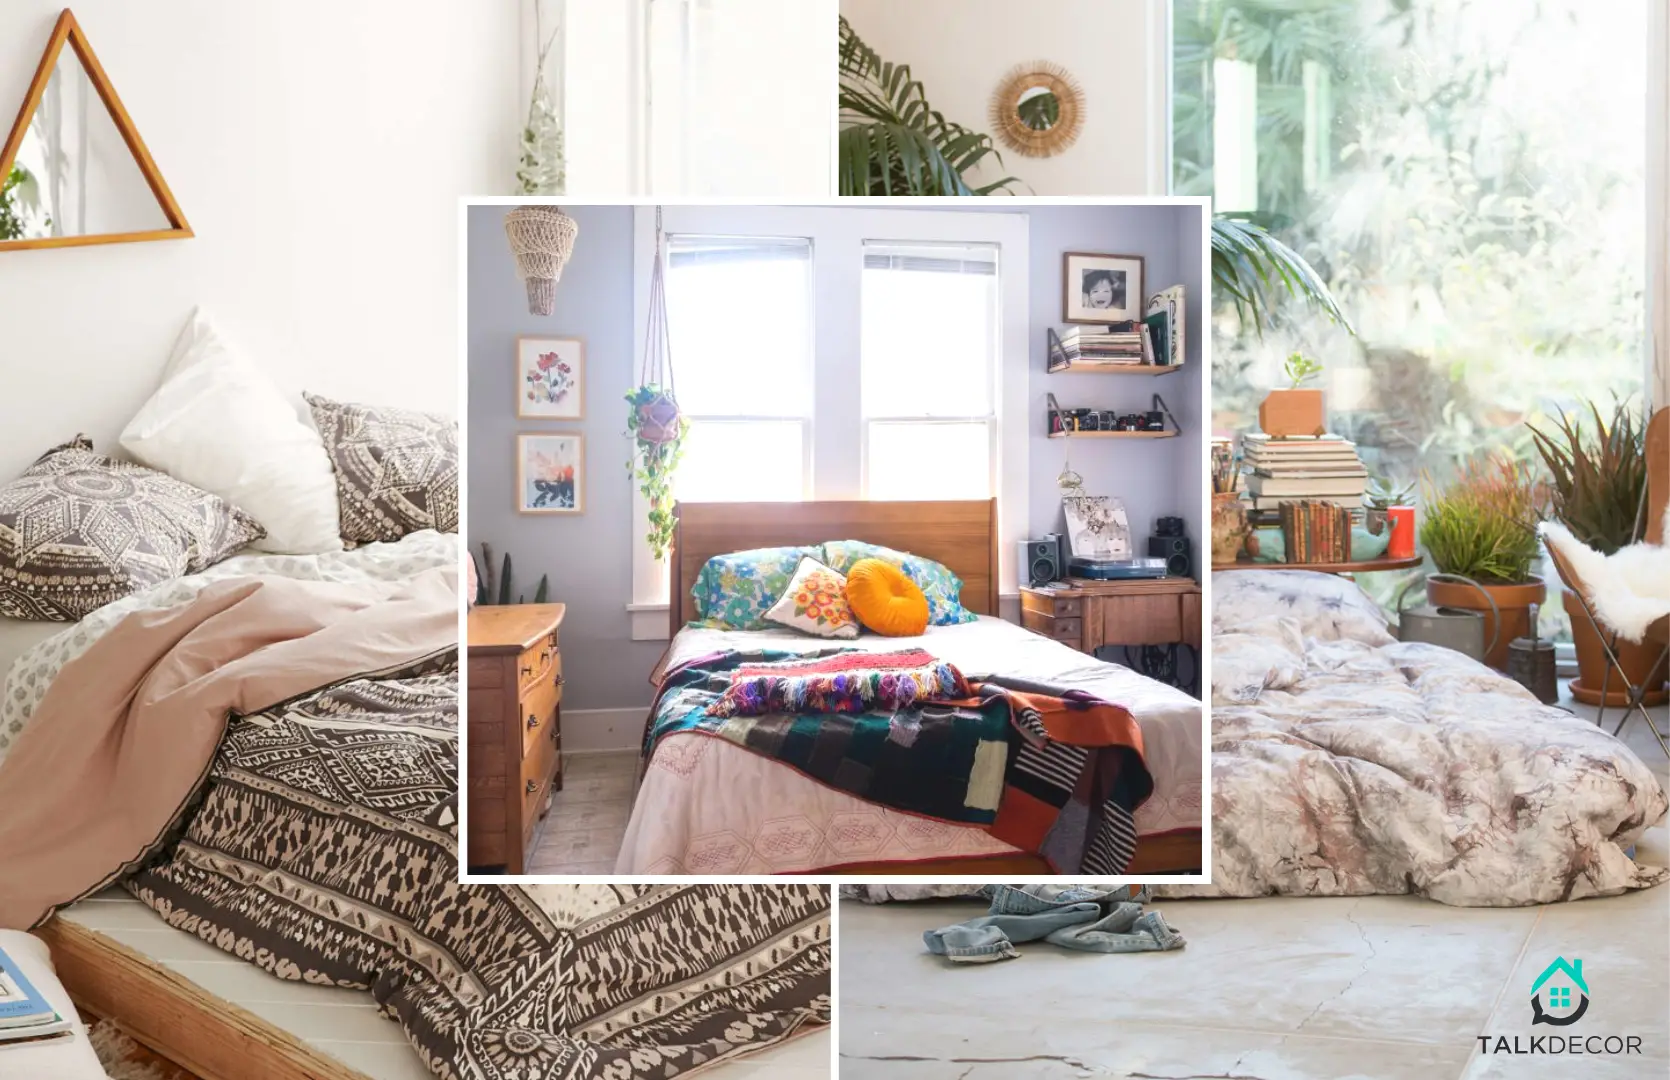 These 5 Features Will Add Flair to Your Boho Bedroom